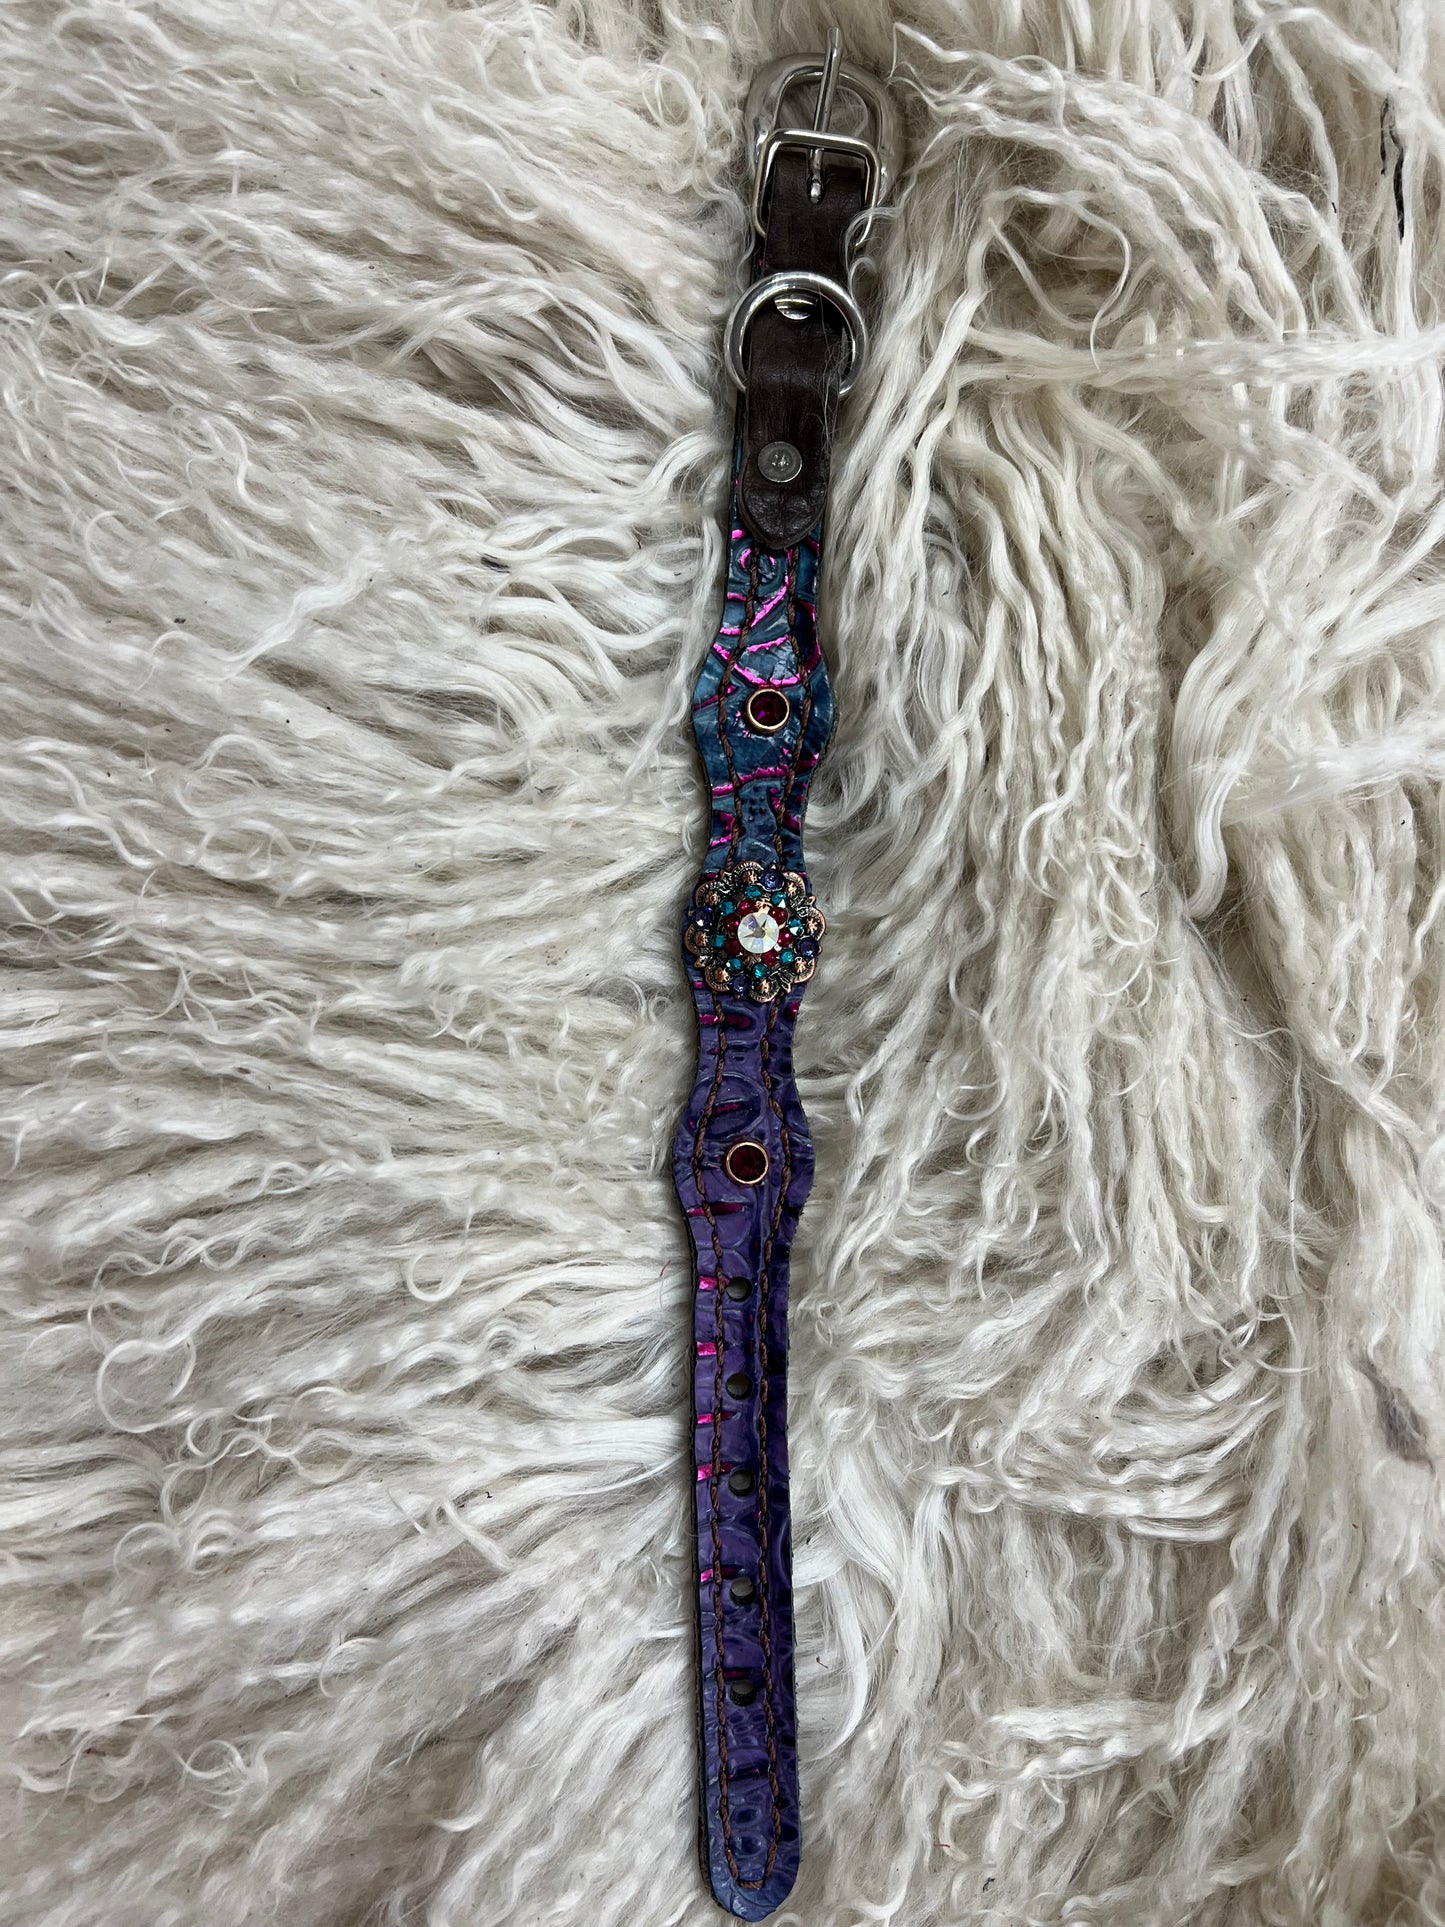 Purple and teal with pink gator and floral on dark leather